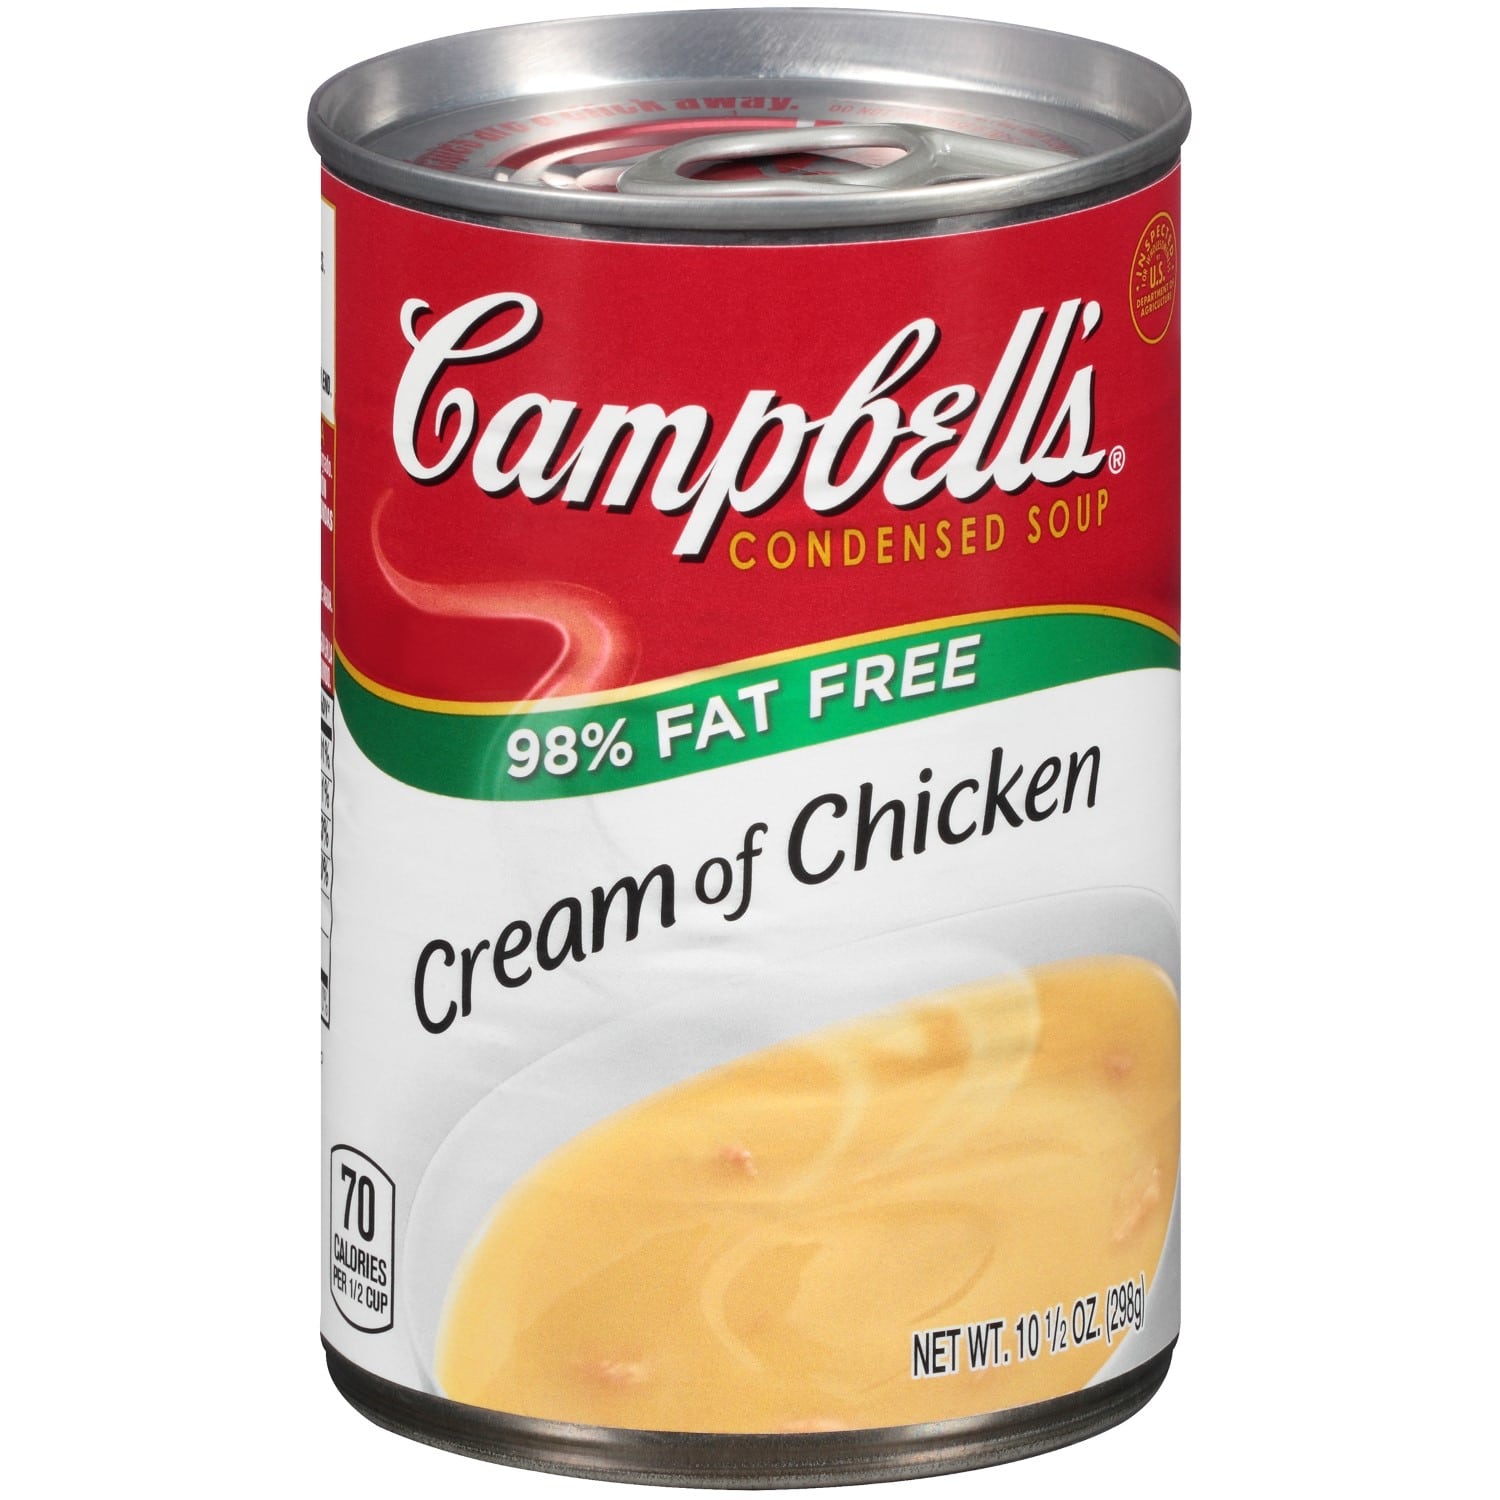 98% Fat Free Cream of Chicken Soup from Kroger